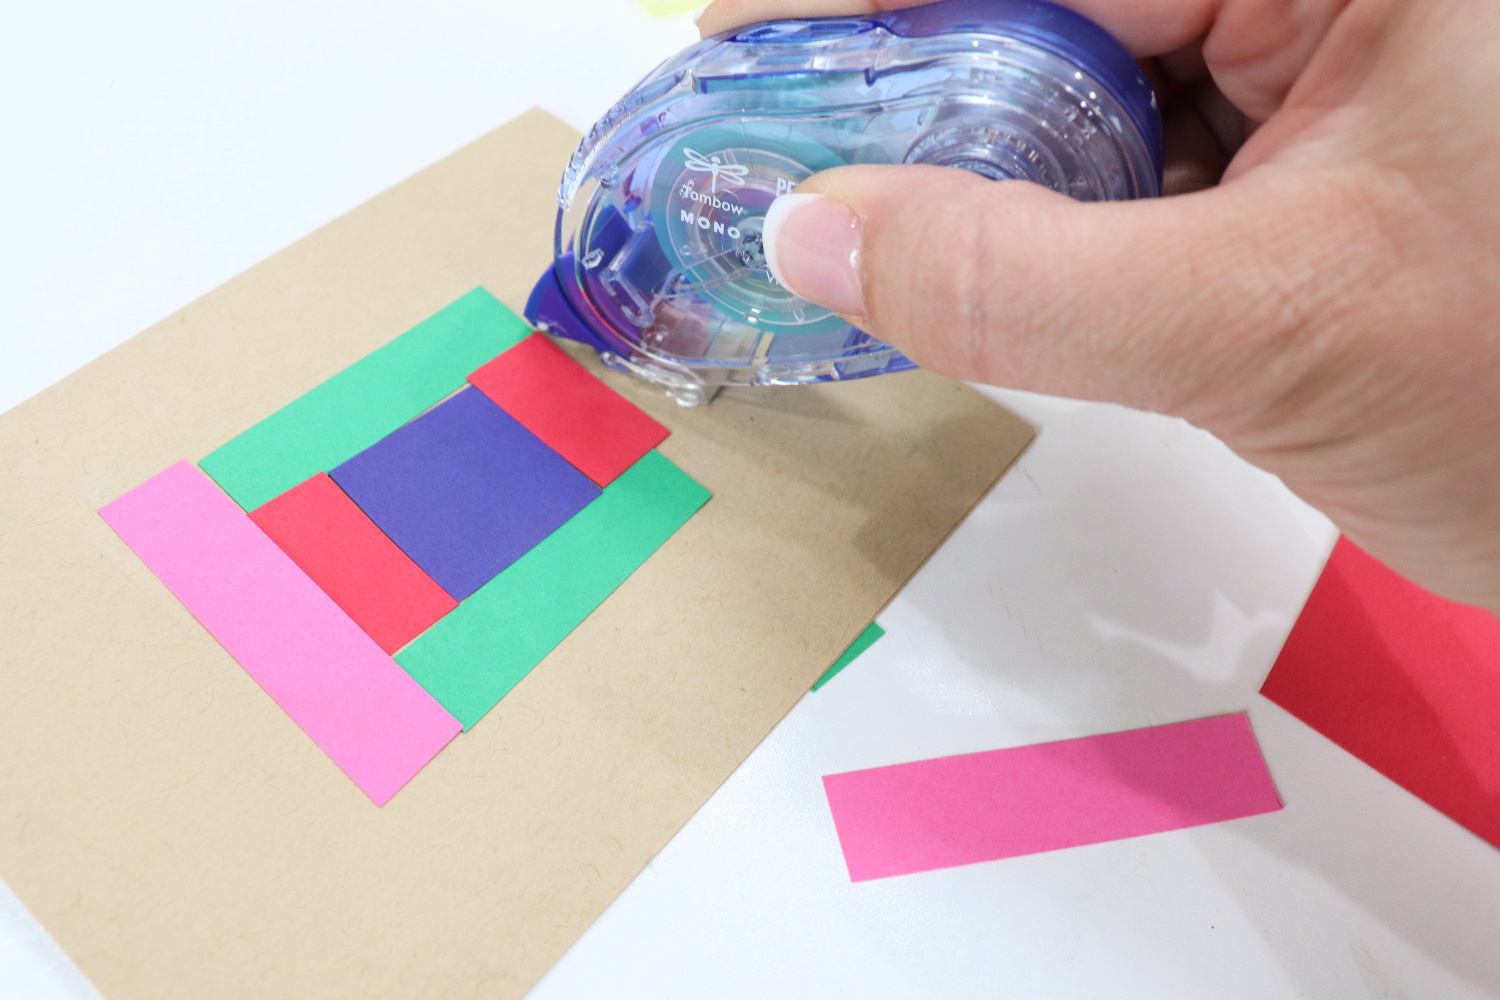 Image contains Amy’s hand holding a blue MONO Permanent Adhesive runner, applying adhesive to a kraft colored card front. Several colorful strips of cardstock are adhered to the card, which sits on a white tabletop.